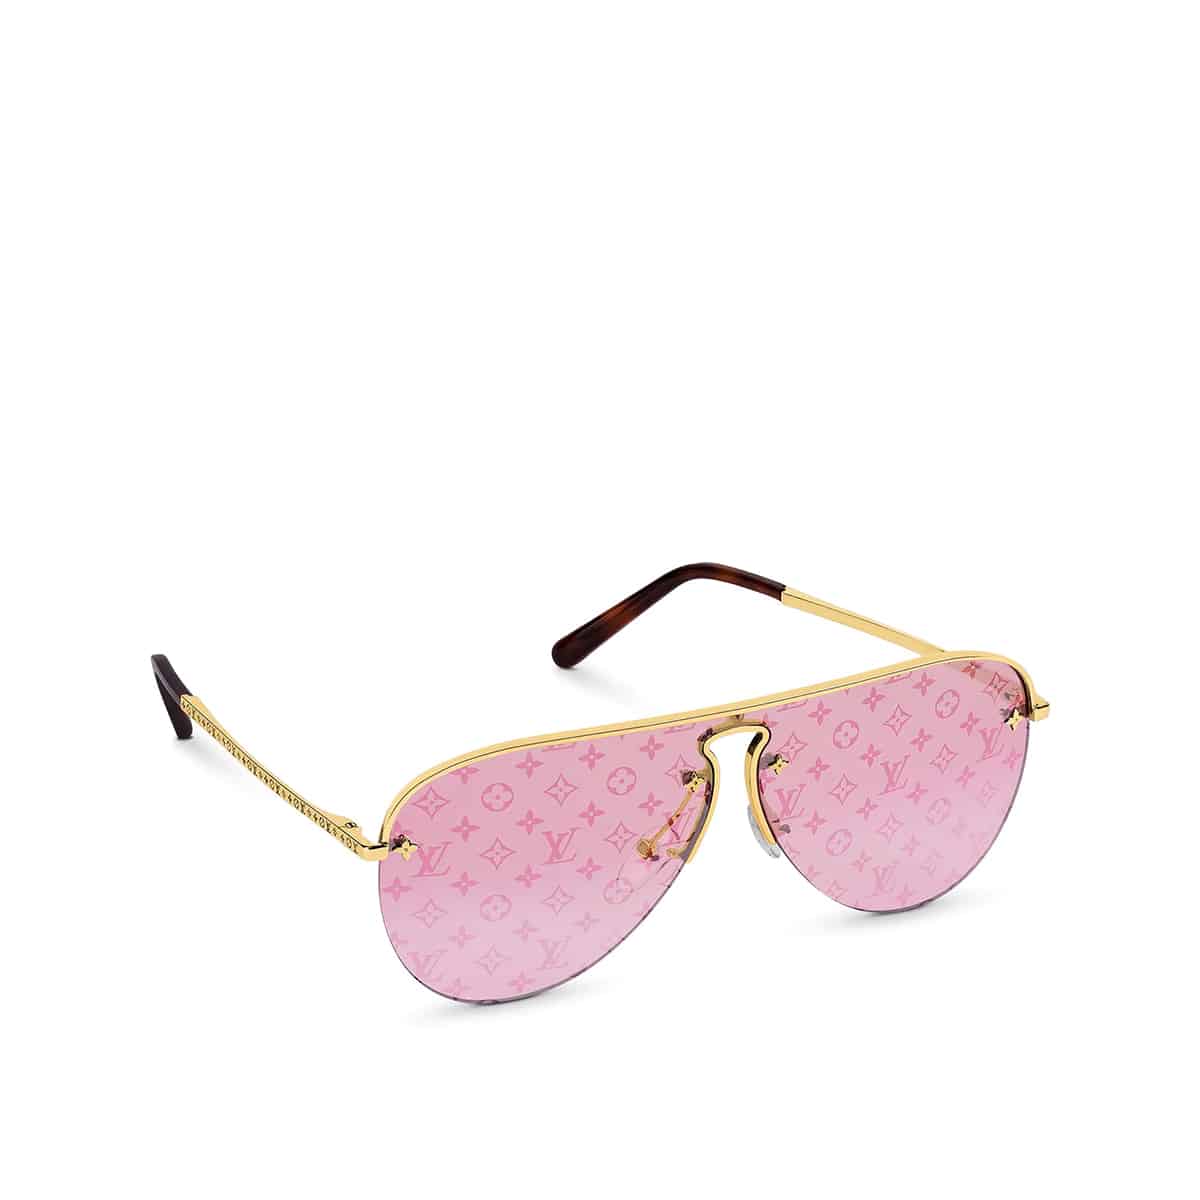 2-Grease Mask Sunglasses - Pink - $765 — Hamptons Real Estate Showcase –  The Premier Luxury Home and Lifestyle Magazine